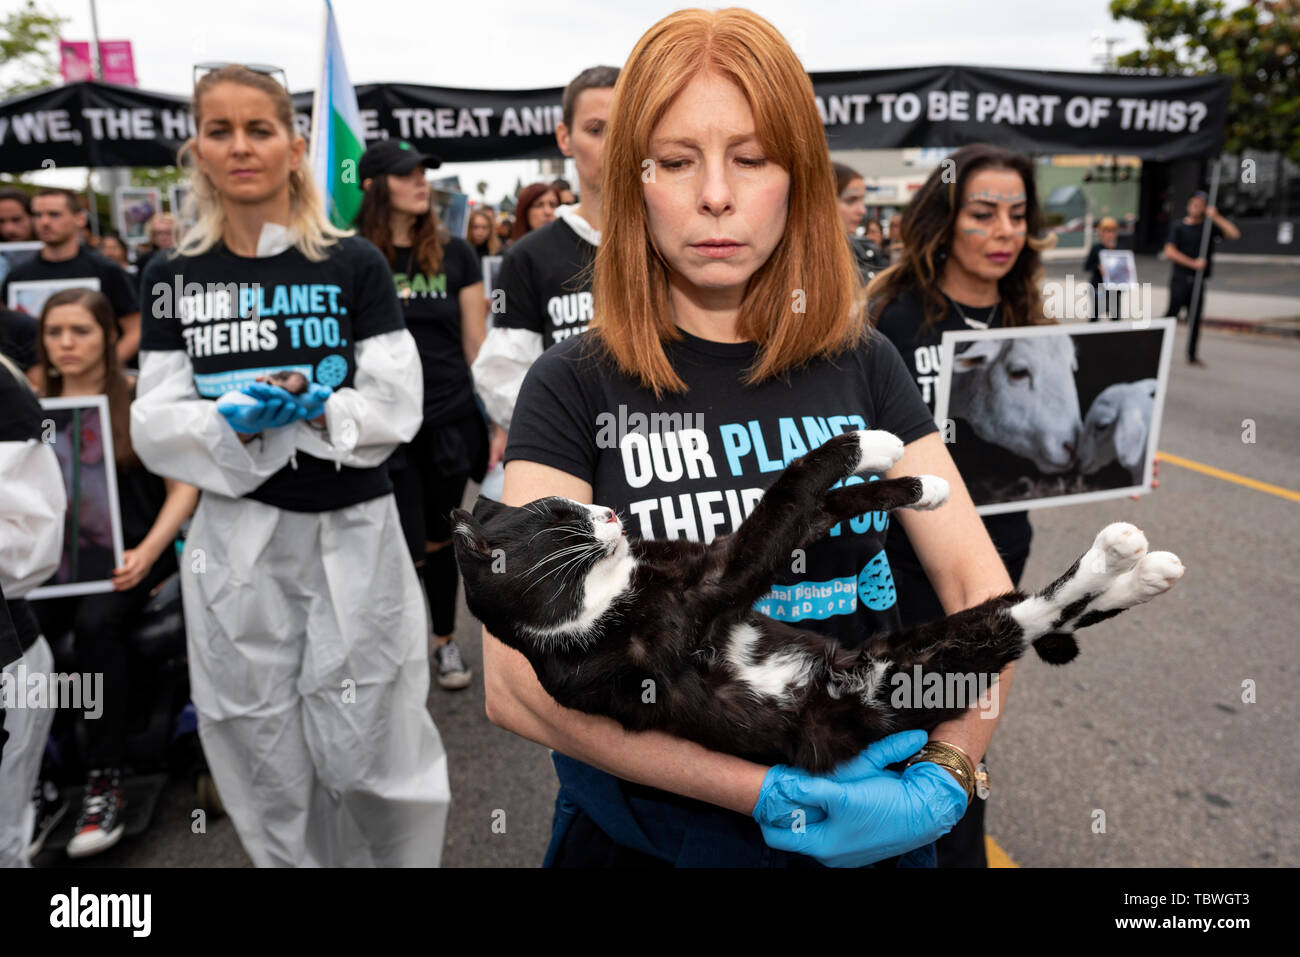 (EDITORS NOTE: Image depicts death) An animal rights activist holds a dead cat during the 9th Annual National Animal Rights Day in Los Angeles, California.  The event included a memorial ceremony and a funeral march for animals that are slaughtered for meat consumption, die in research laboratories and the cosmetics industry. Organizers called to end animal cruelty and suffering. Stock Photo